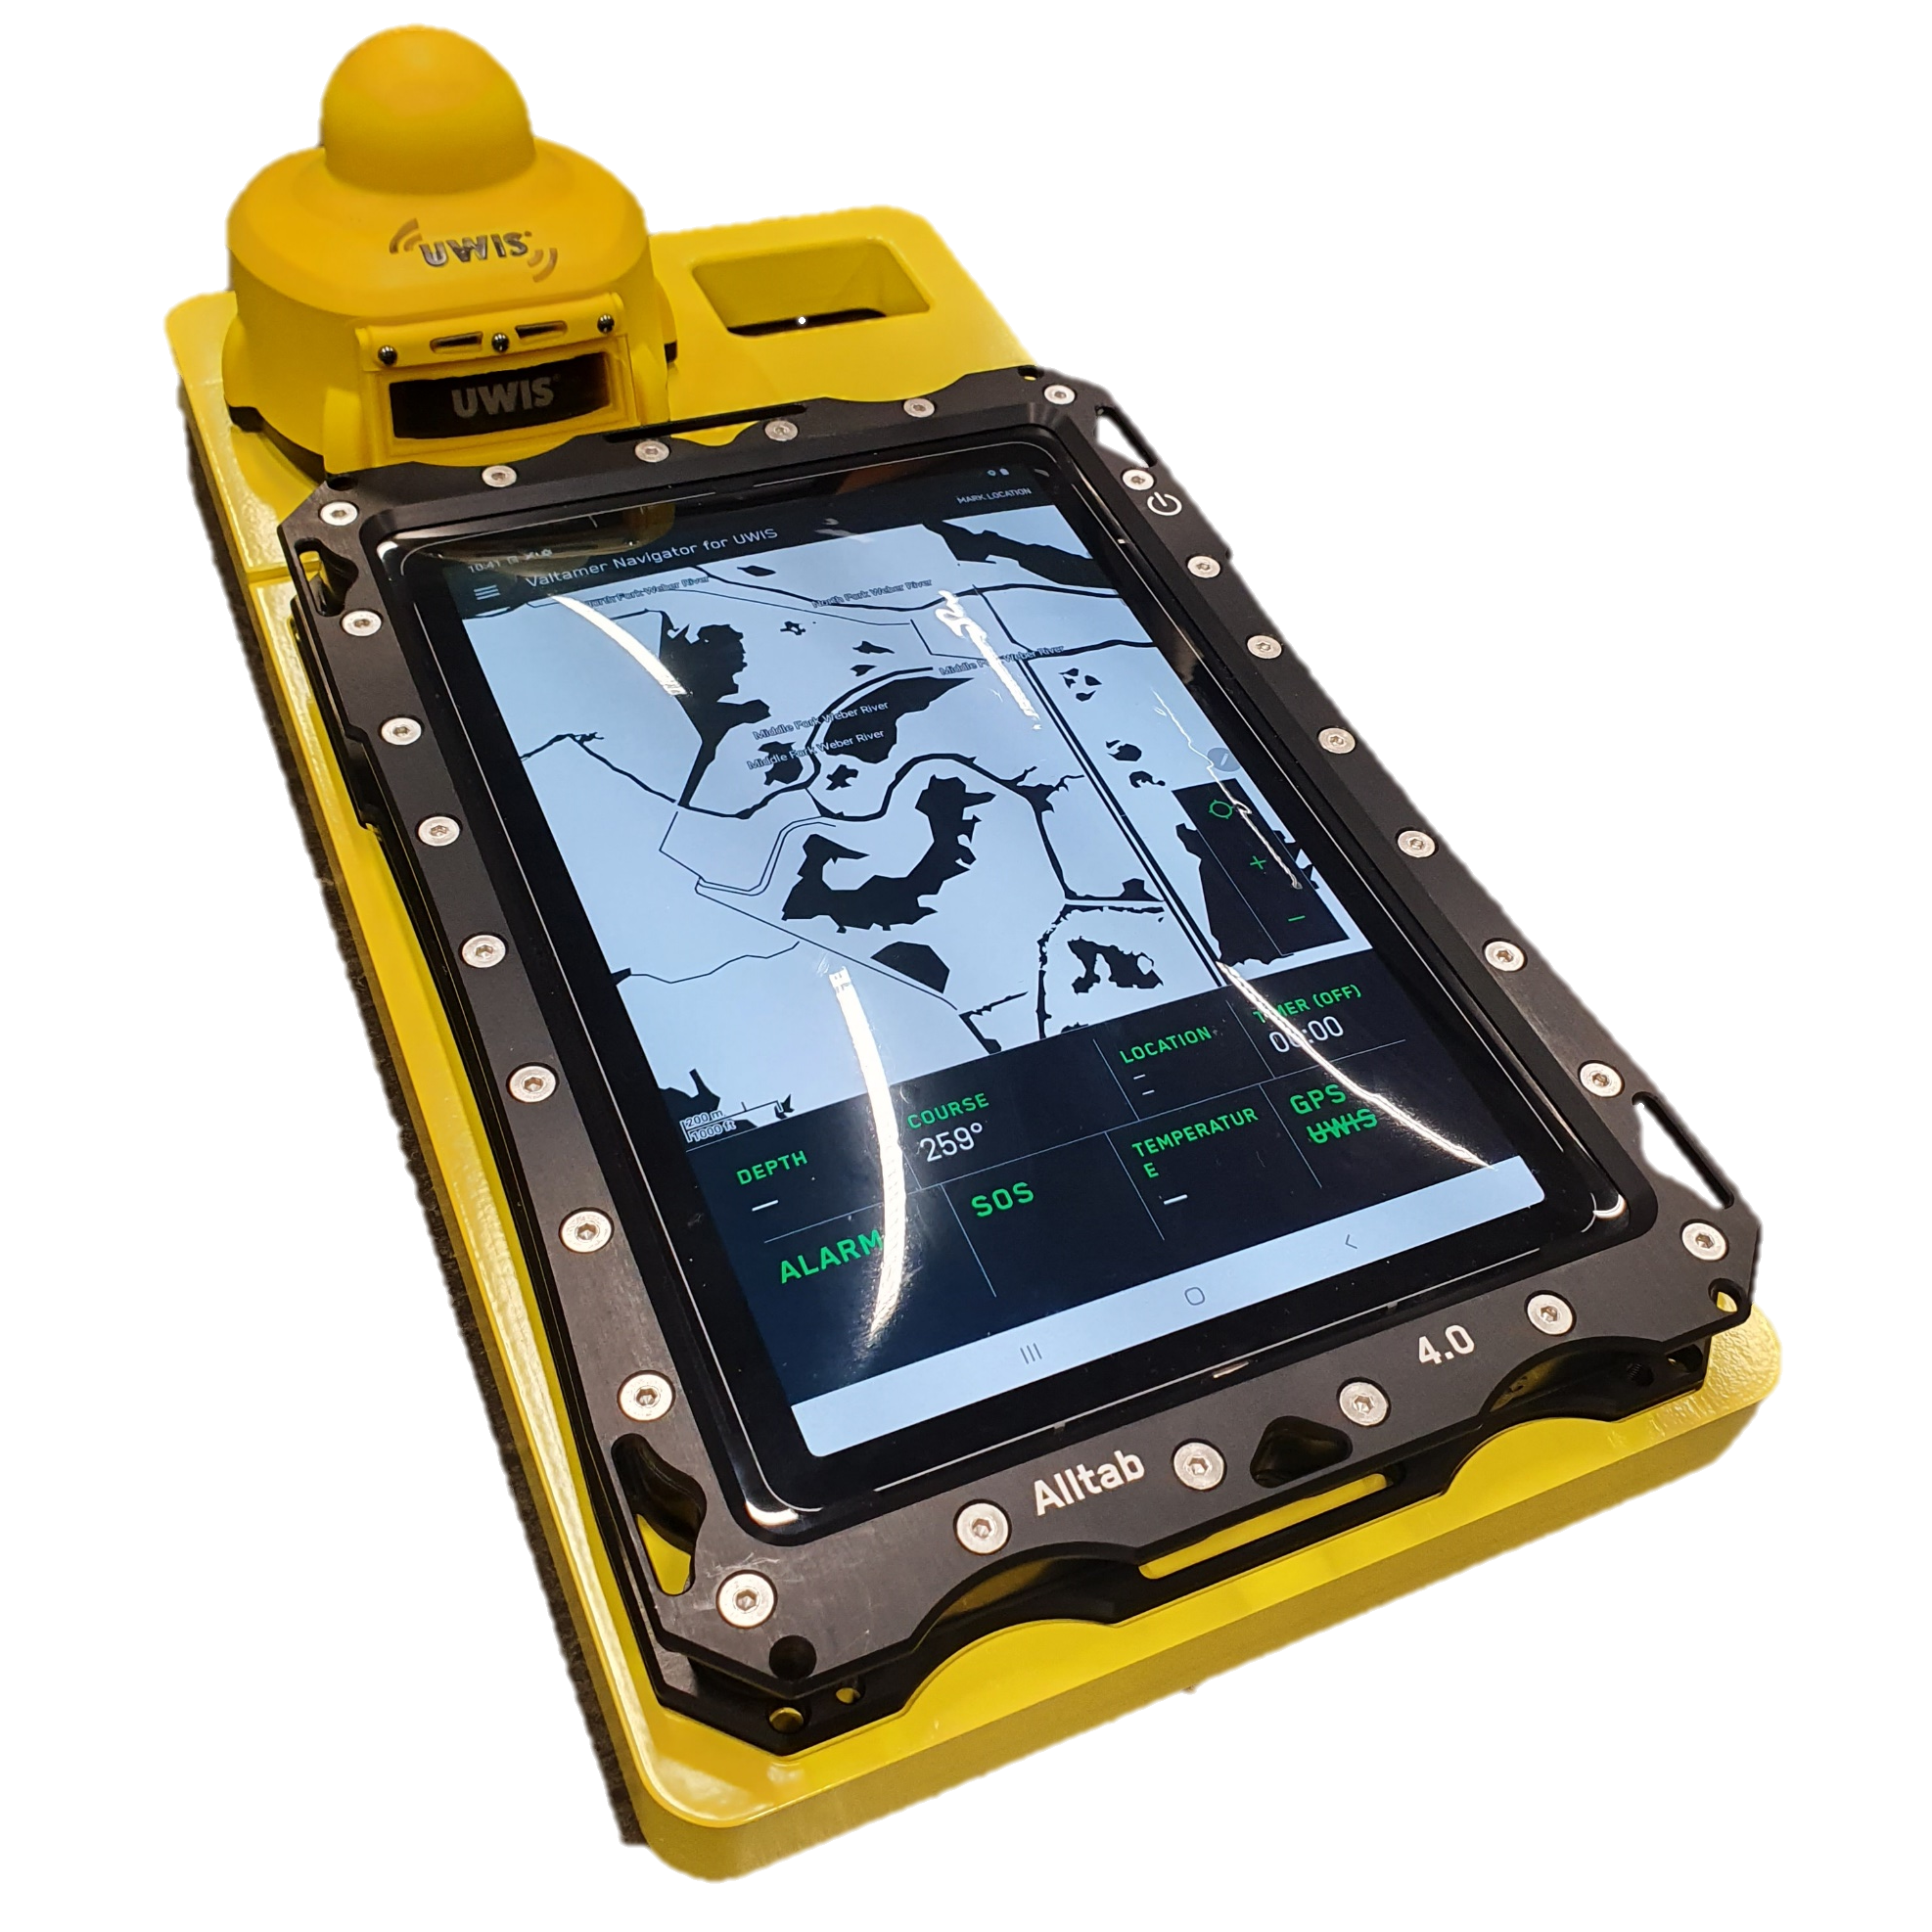 Underwater Precision Exploration with UWIS Tablet